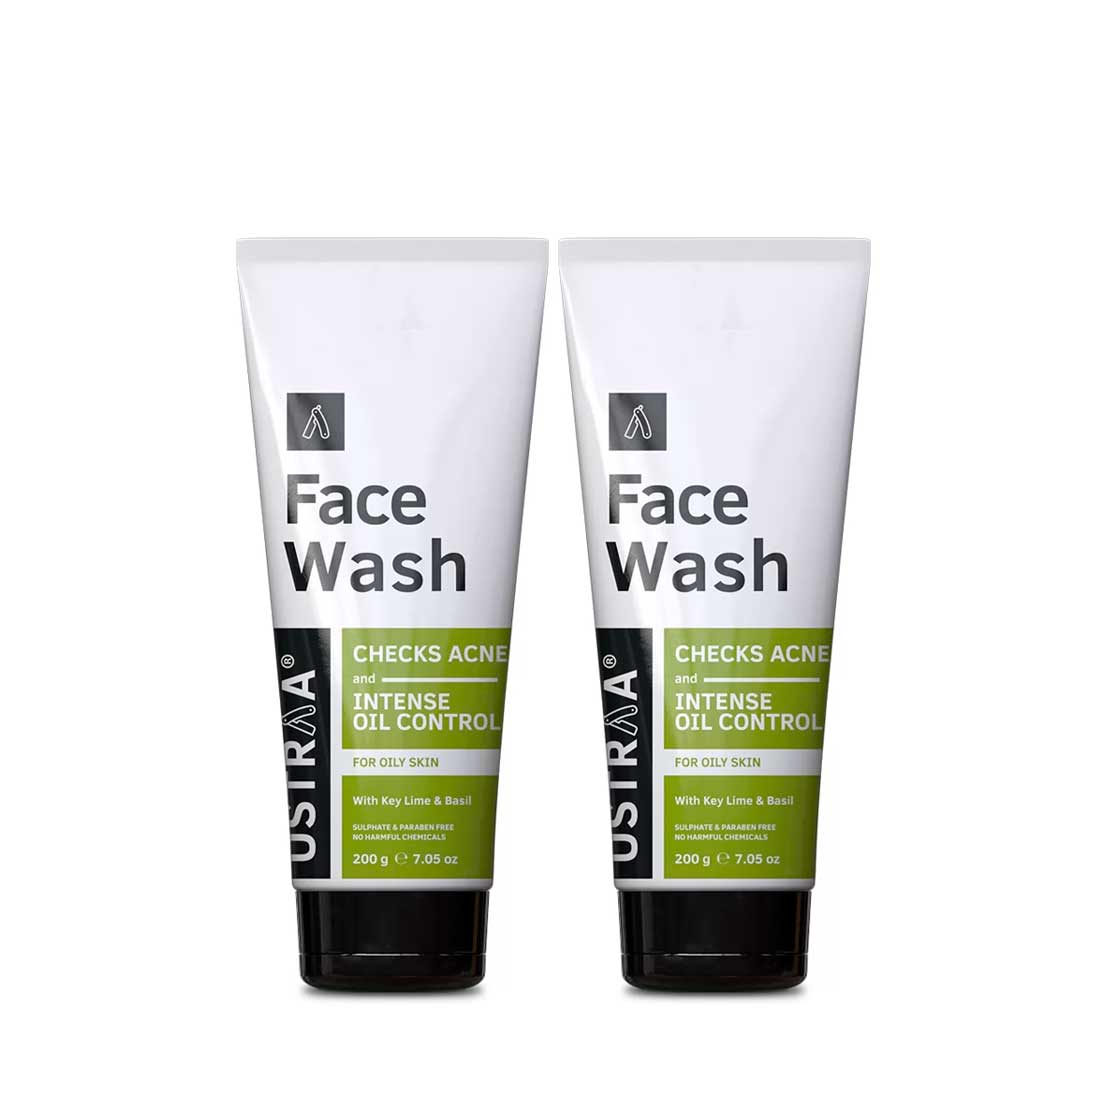 Ustraa Face Wash - for Oily and Acne Prone Skin  Set of 2- Sulphate & Paraben Free - Checks Acne and Blackheads - 200g